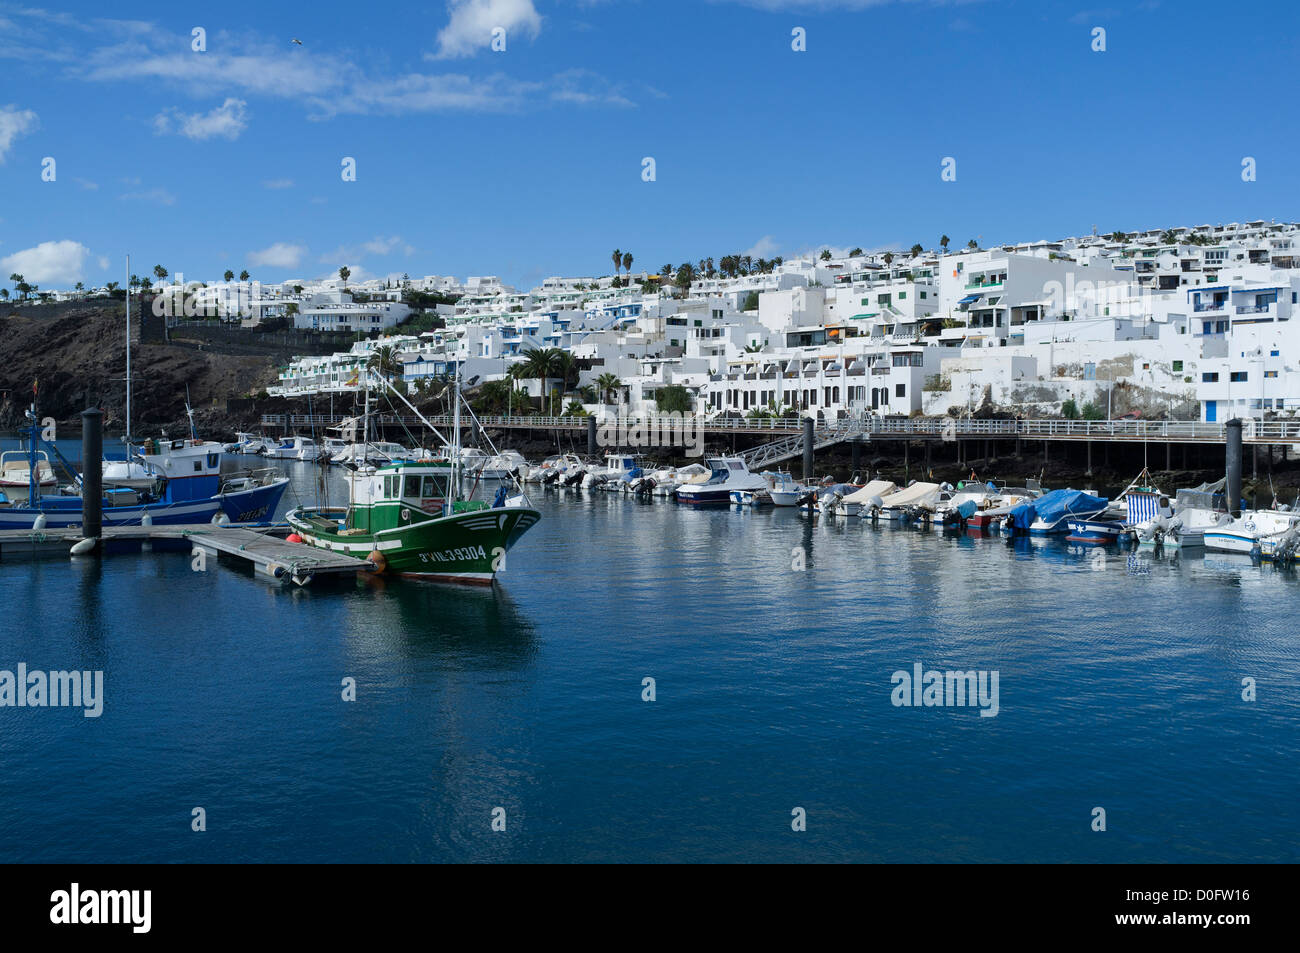 dh Old Harbour PUERTO DEL CARMEN LANZAROTE Fishing boats alongside jetty old town harbour marina boat Stock Photo